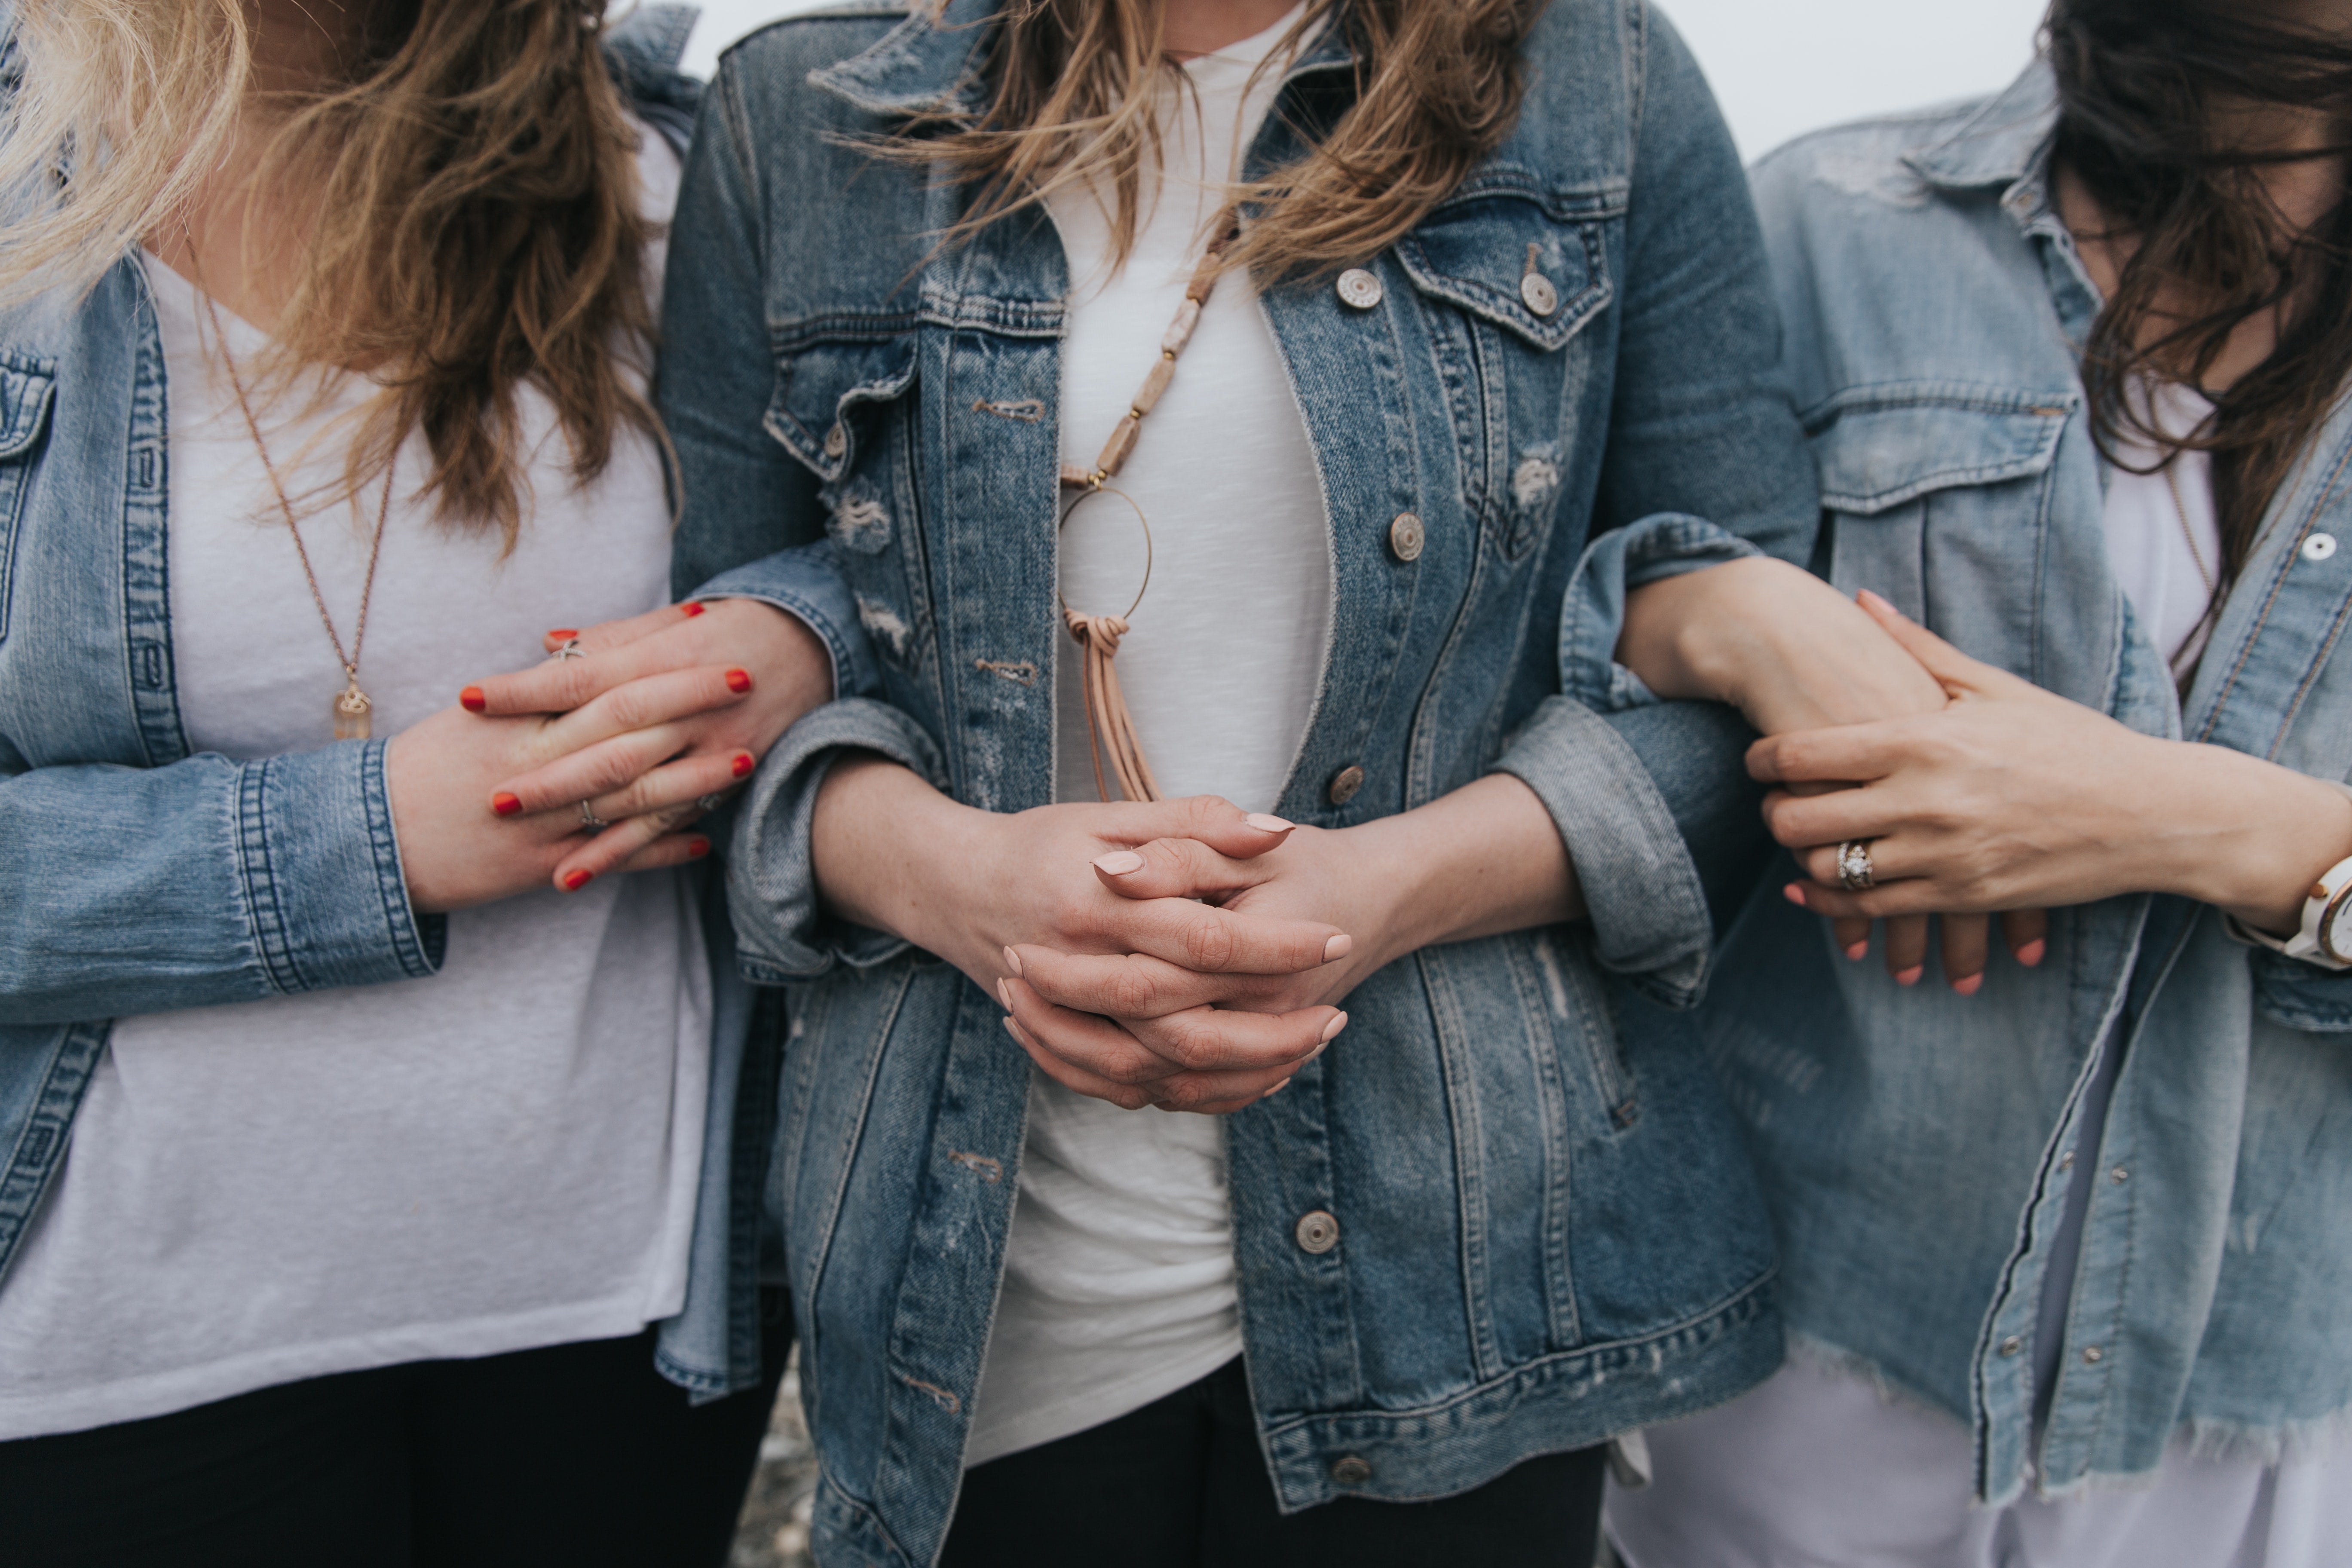 Three women photographed from the neck down, wearing white tees and oversized jean jackets. They are linking arms.